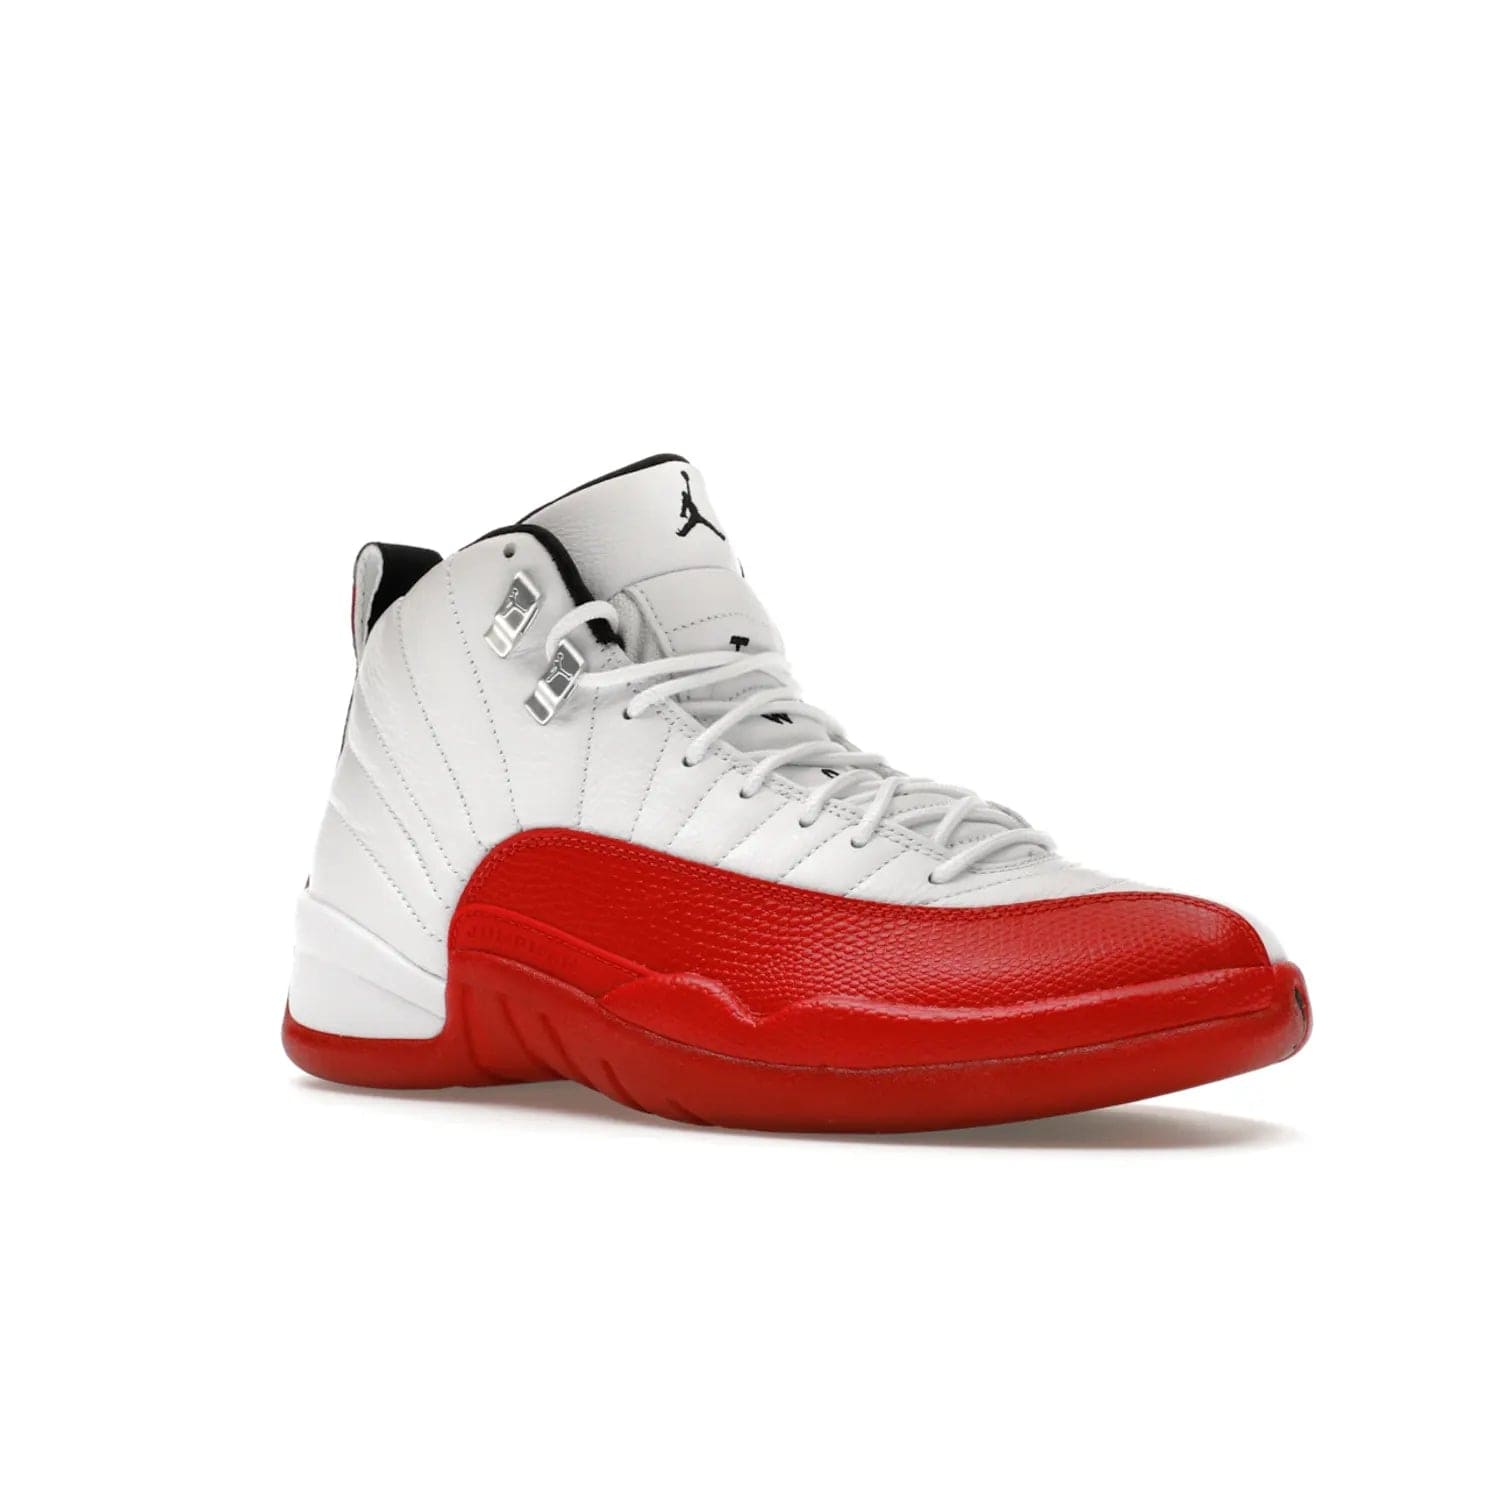 Jordan 12 Retro Cherry (2023) - Image 4 - Only at www.BallersClubKickz.com - Live your sneaker legend with the Jordan 12 Retro Cherry. Iconic pebbled leather mudguards, quilted uppers, and varsity red accents make this 1997 classic a must-have for 2023. Shine on with silver hardware and matching midsoles, and bring it all together for limited-edition style on October 28th. Step into Jordan legacy with the Retro Cherry.